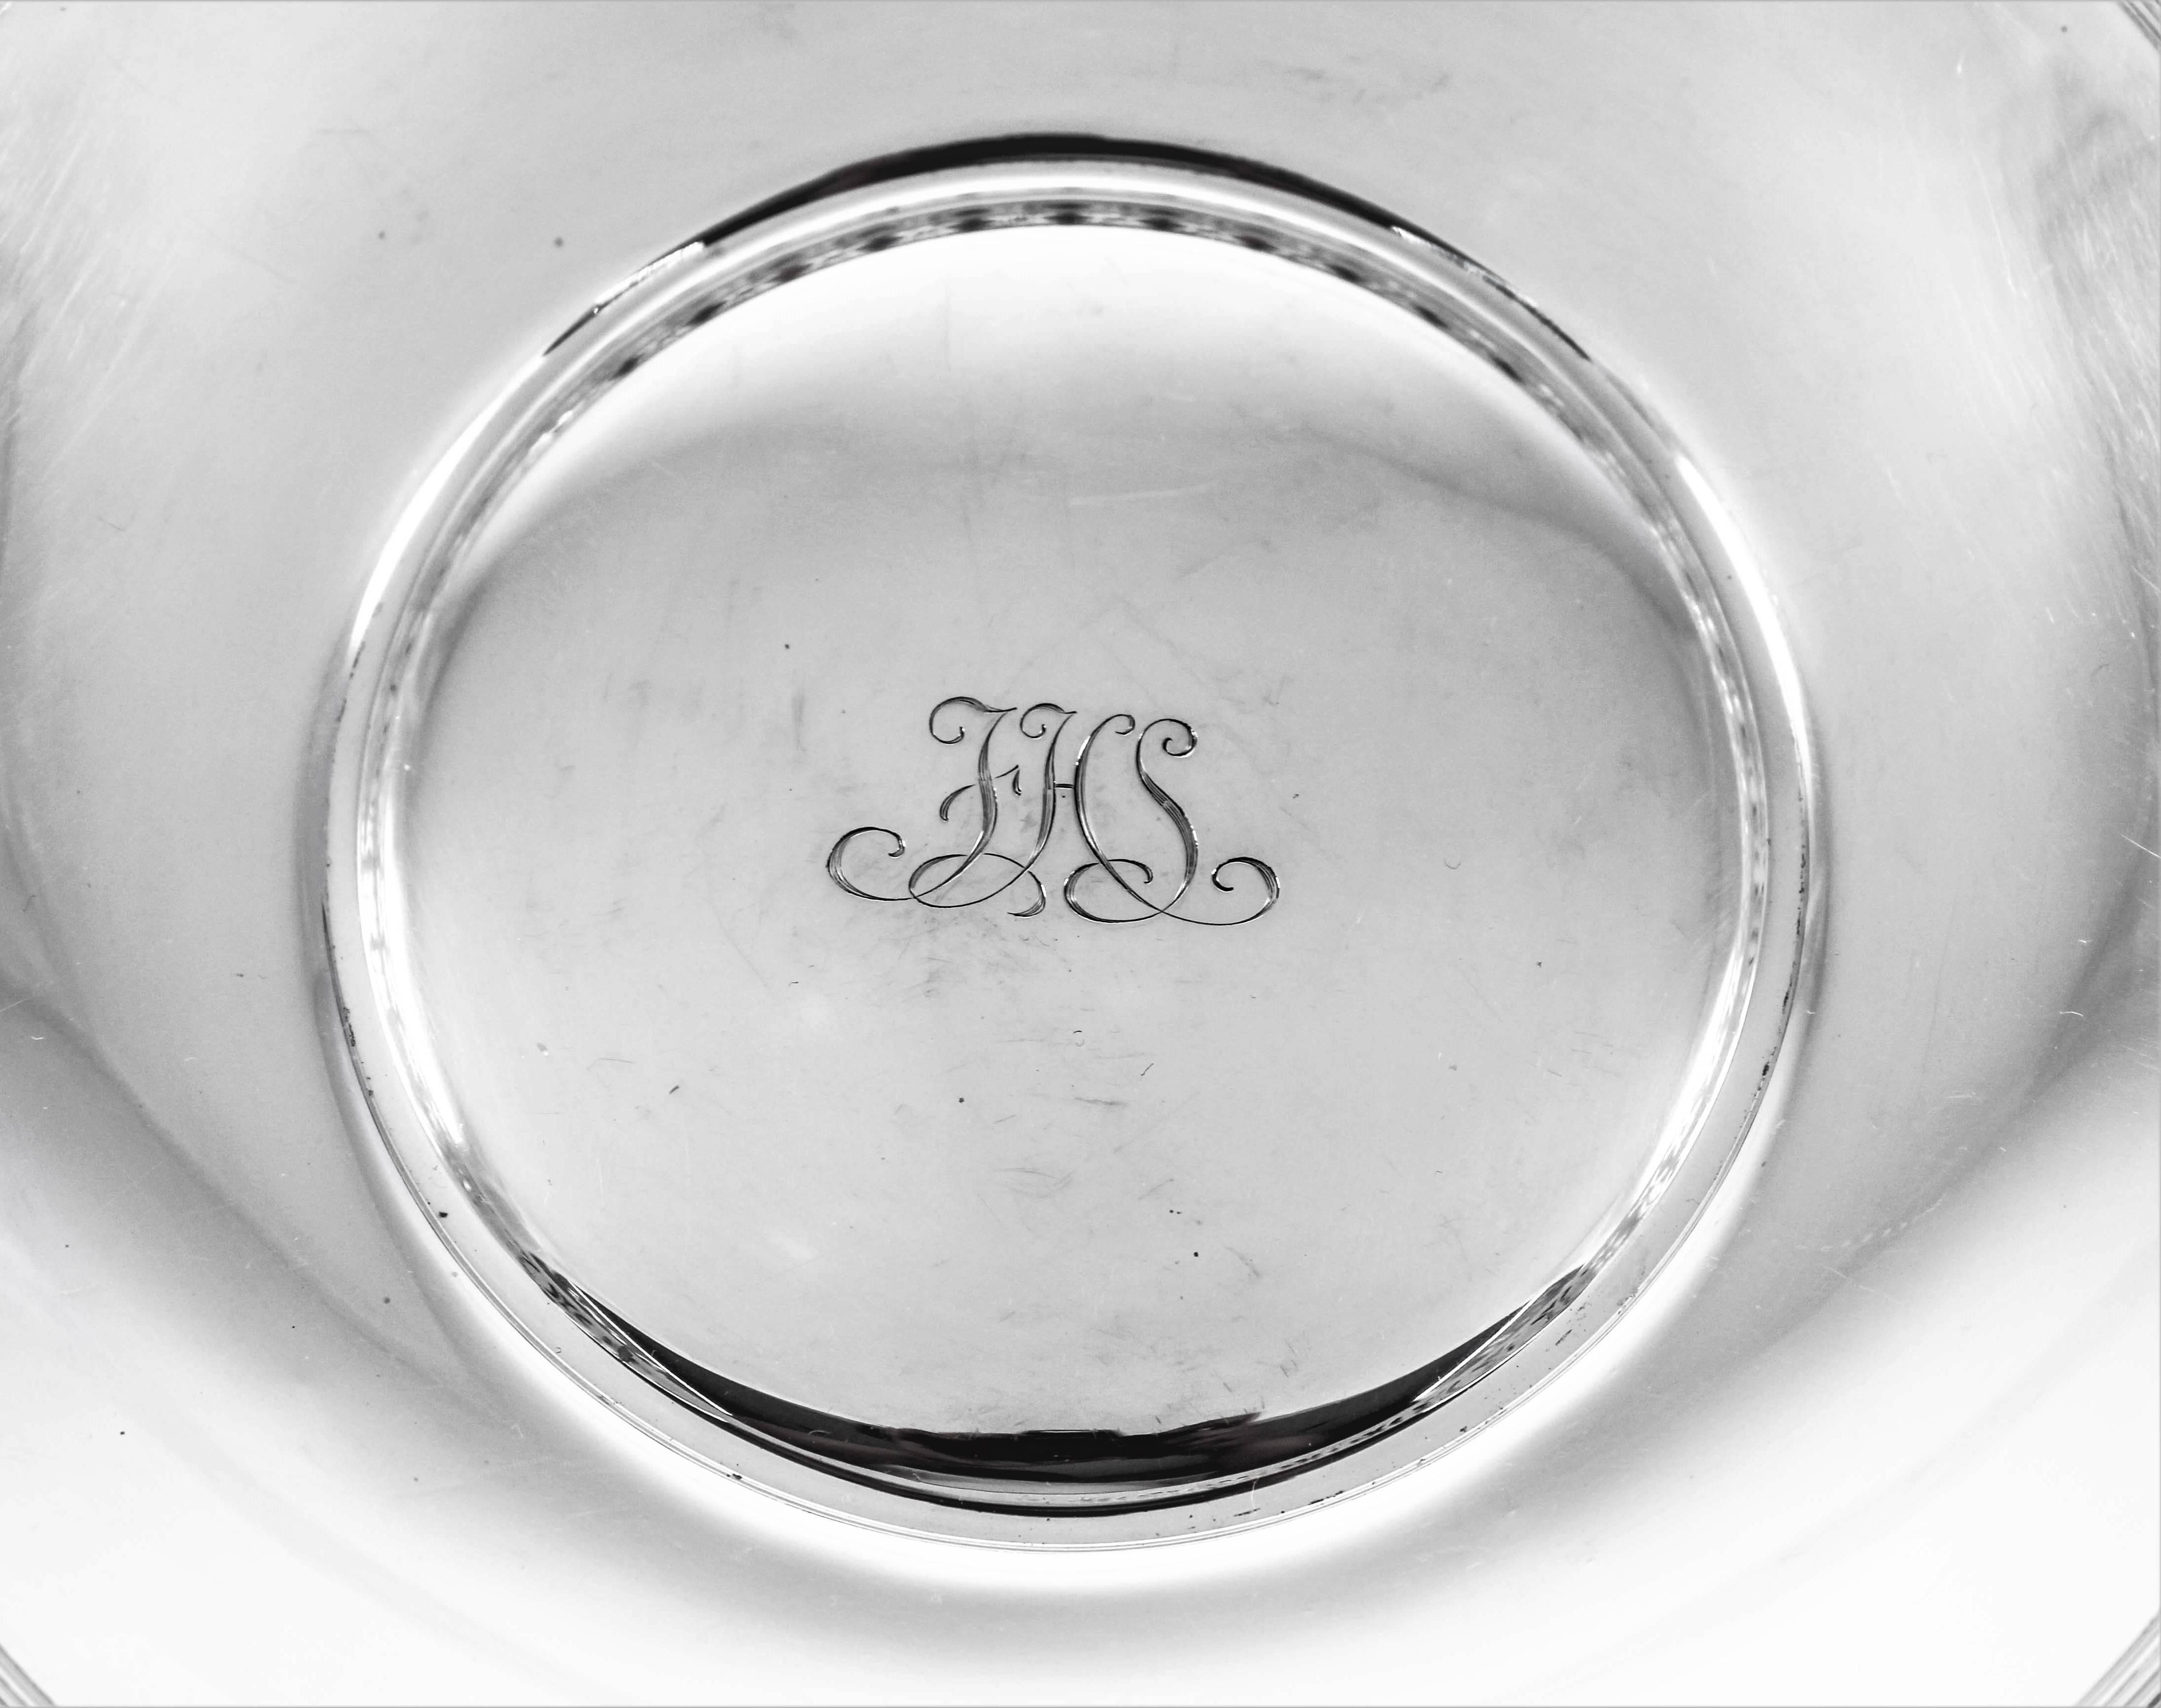 A reticulated border encloses this Tiffany & Company bowl. In the center there is a hand engraved monogram. A nice practical size for intimate parties.
 